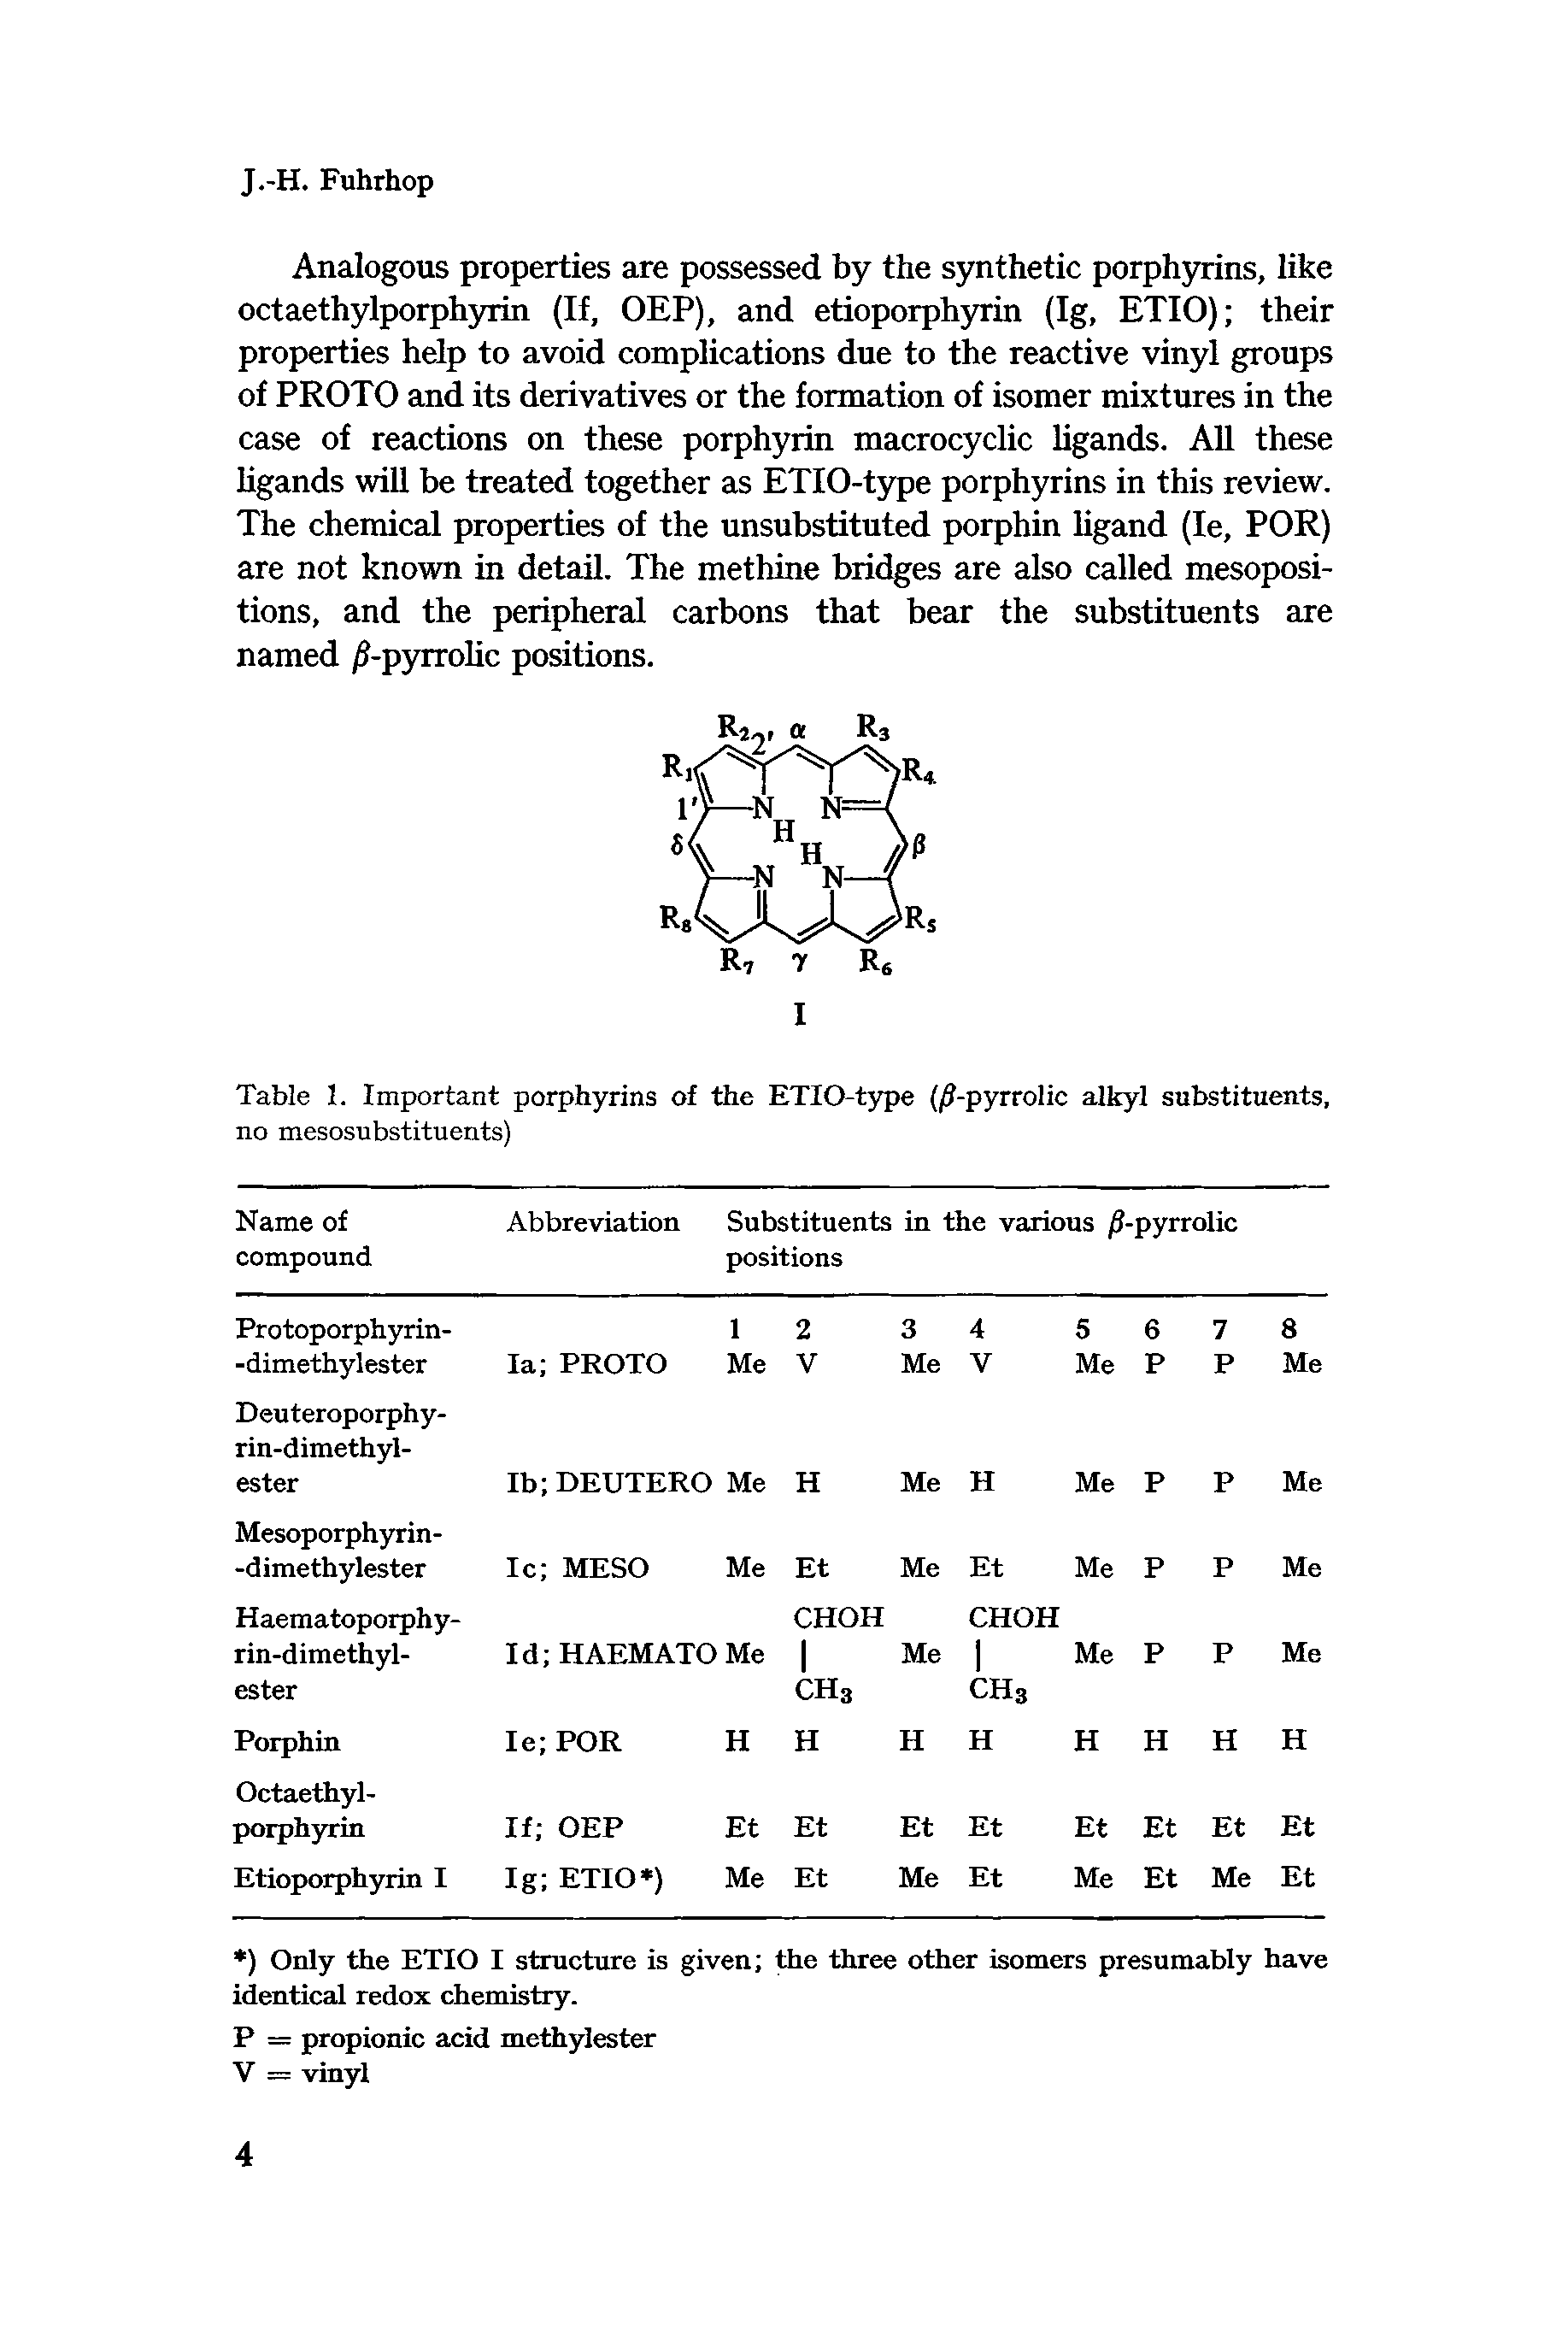 Table 1. Important porphyrins of the ETIO-type (/ -pyrrolic alkyl substituents,...